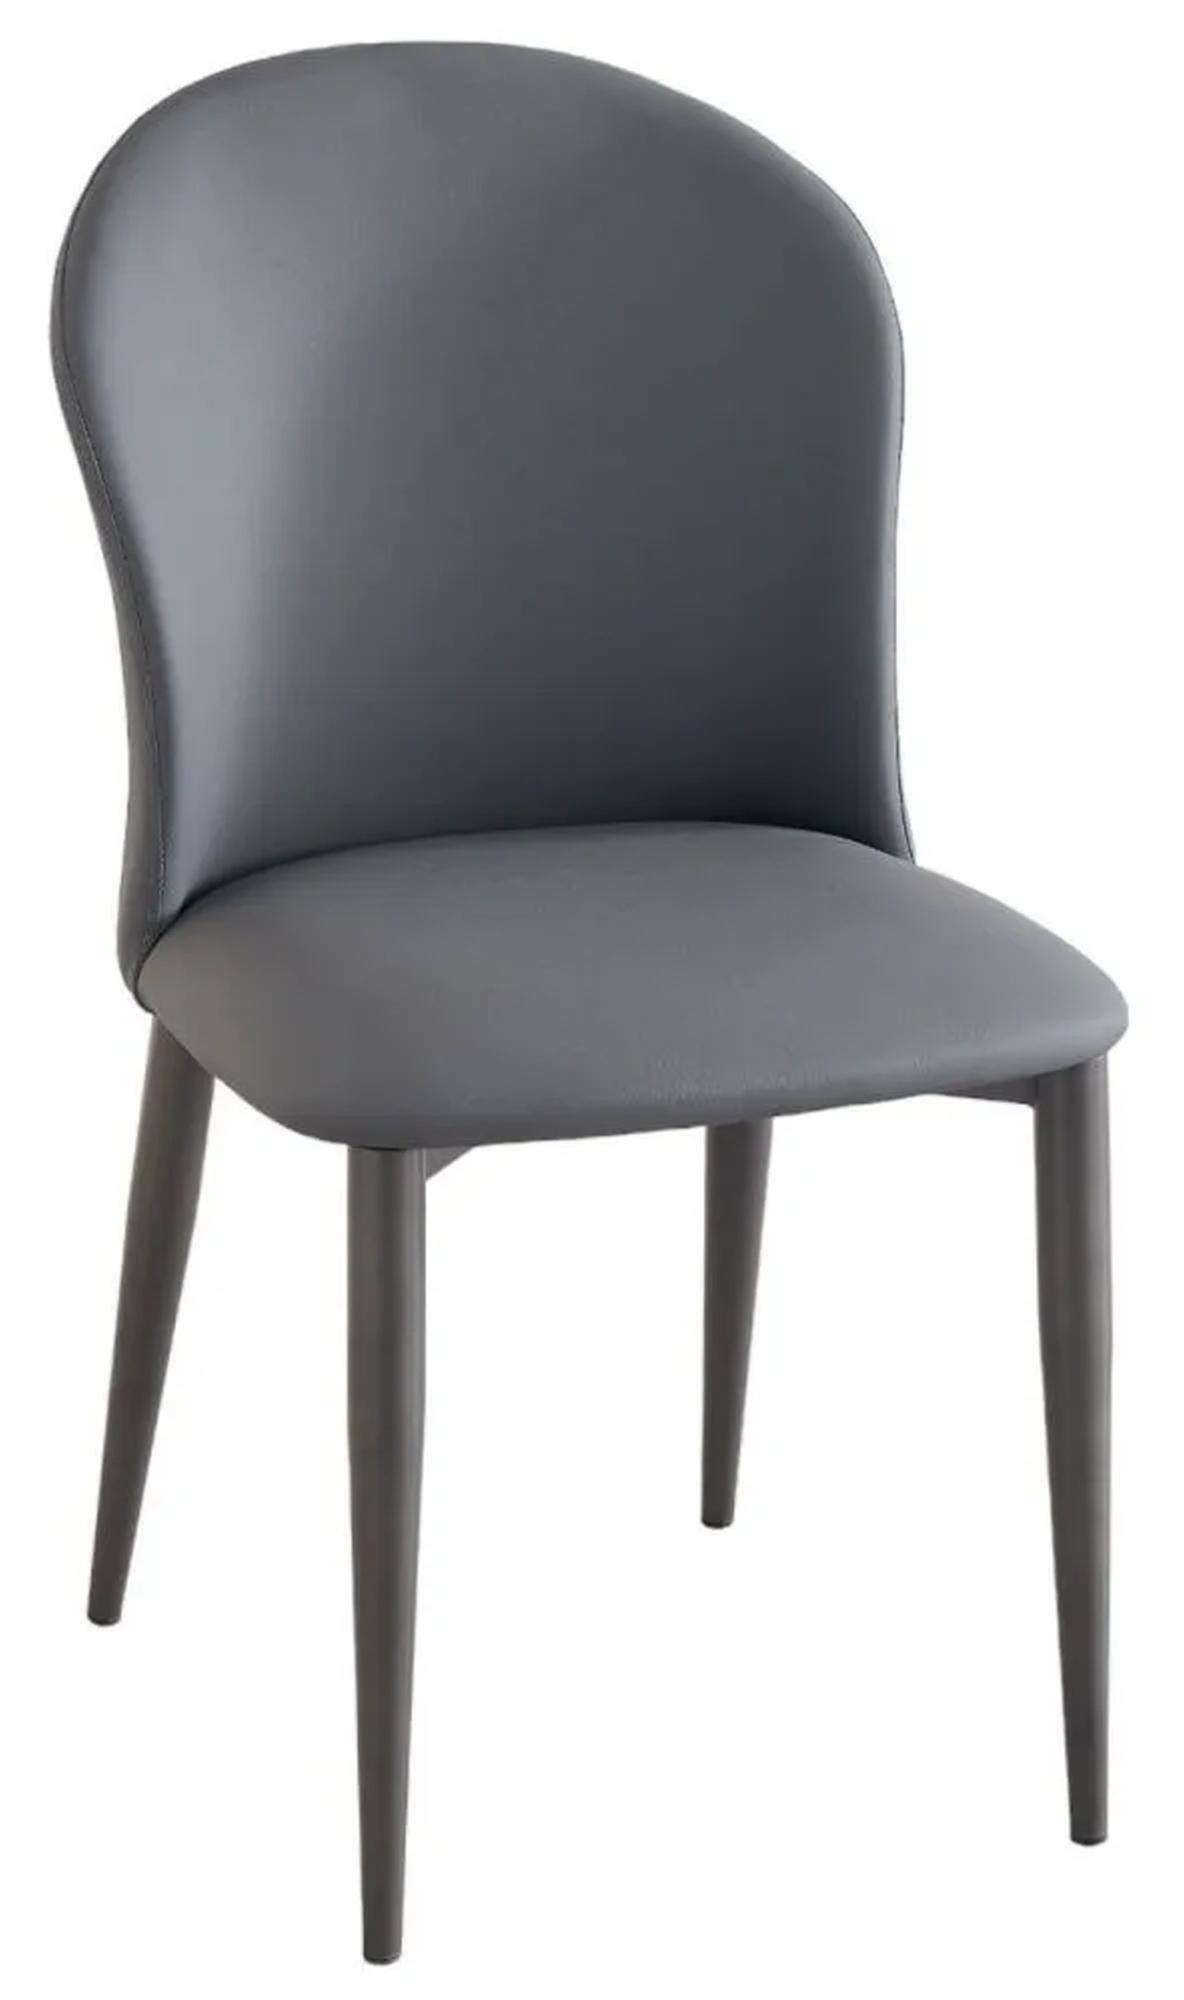 Nancy Dark Grey Faux Leather High Back Dining Chair with Bronze Legs